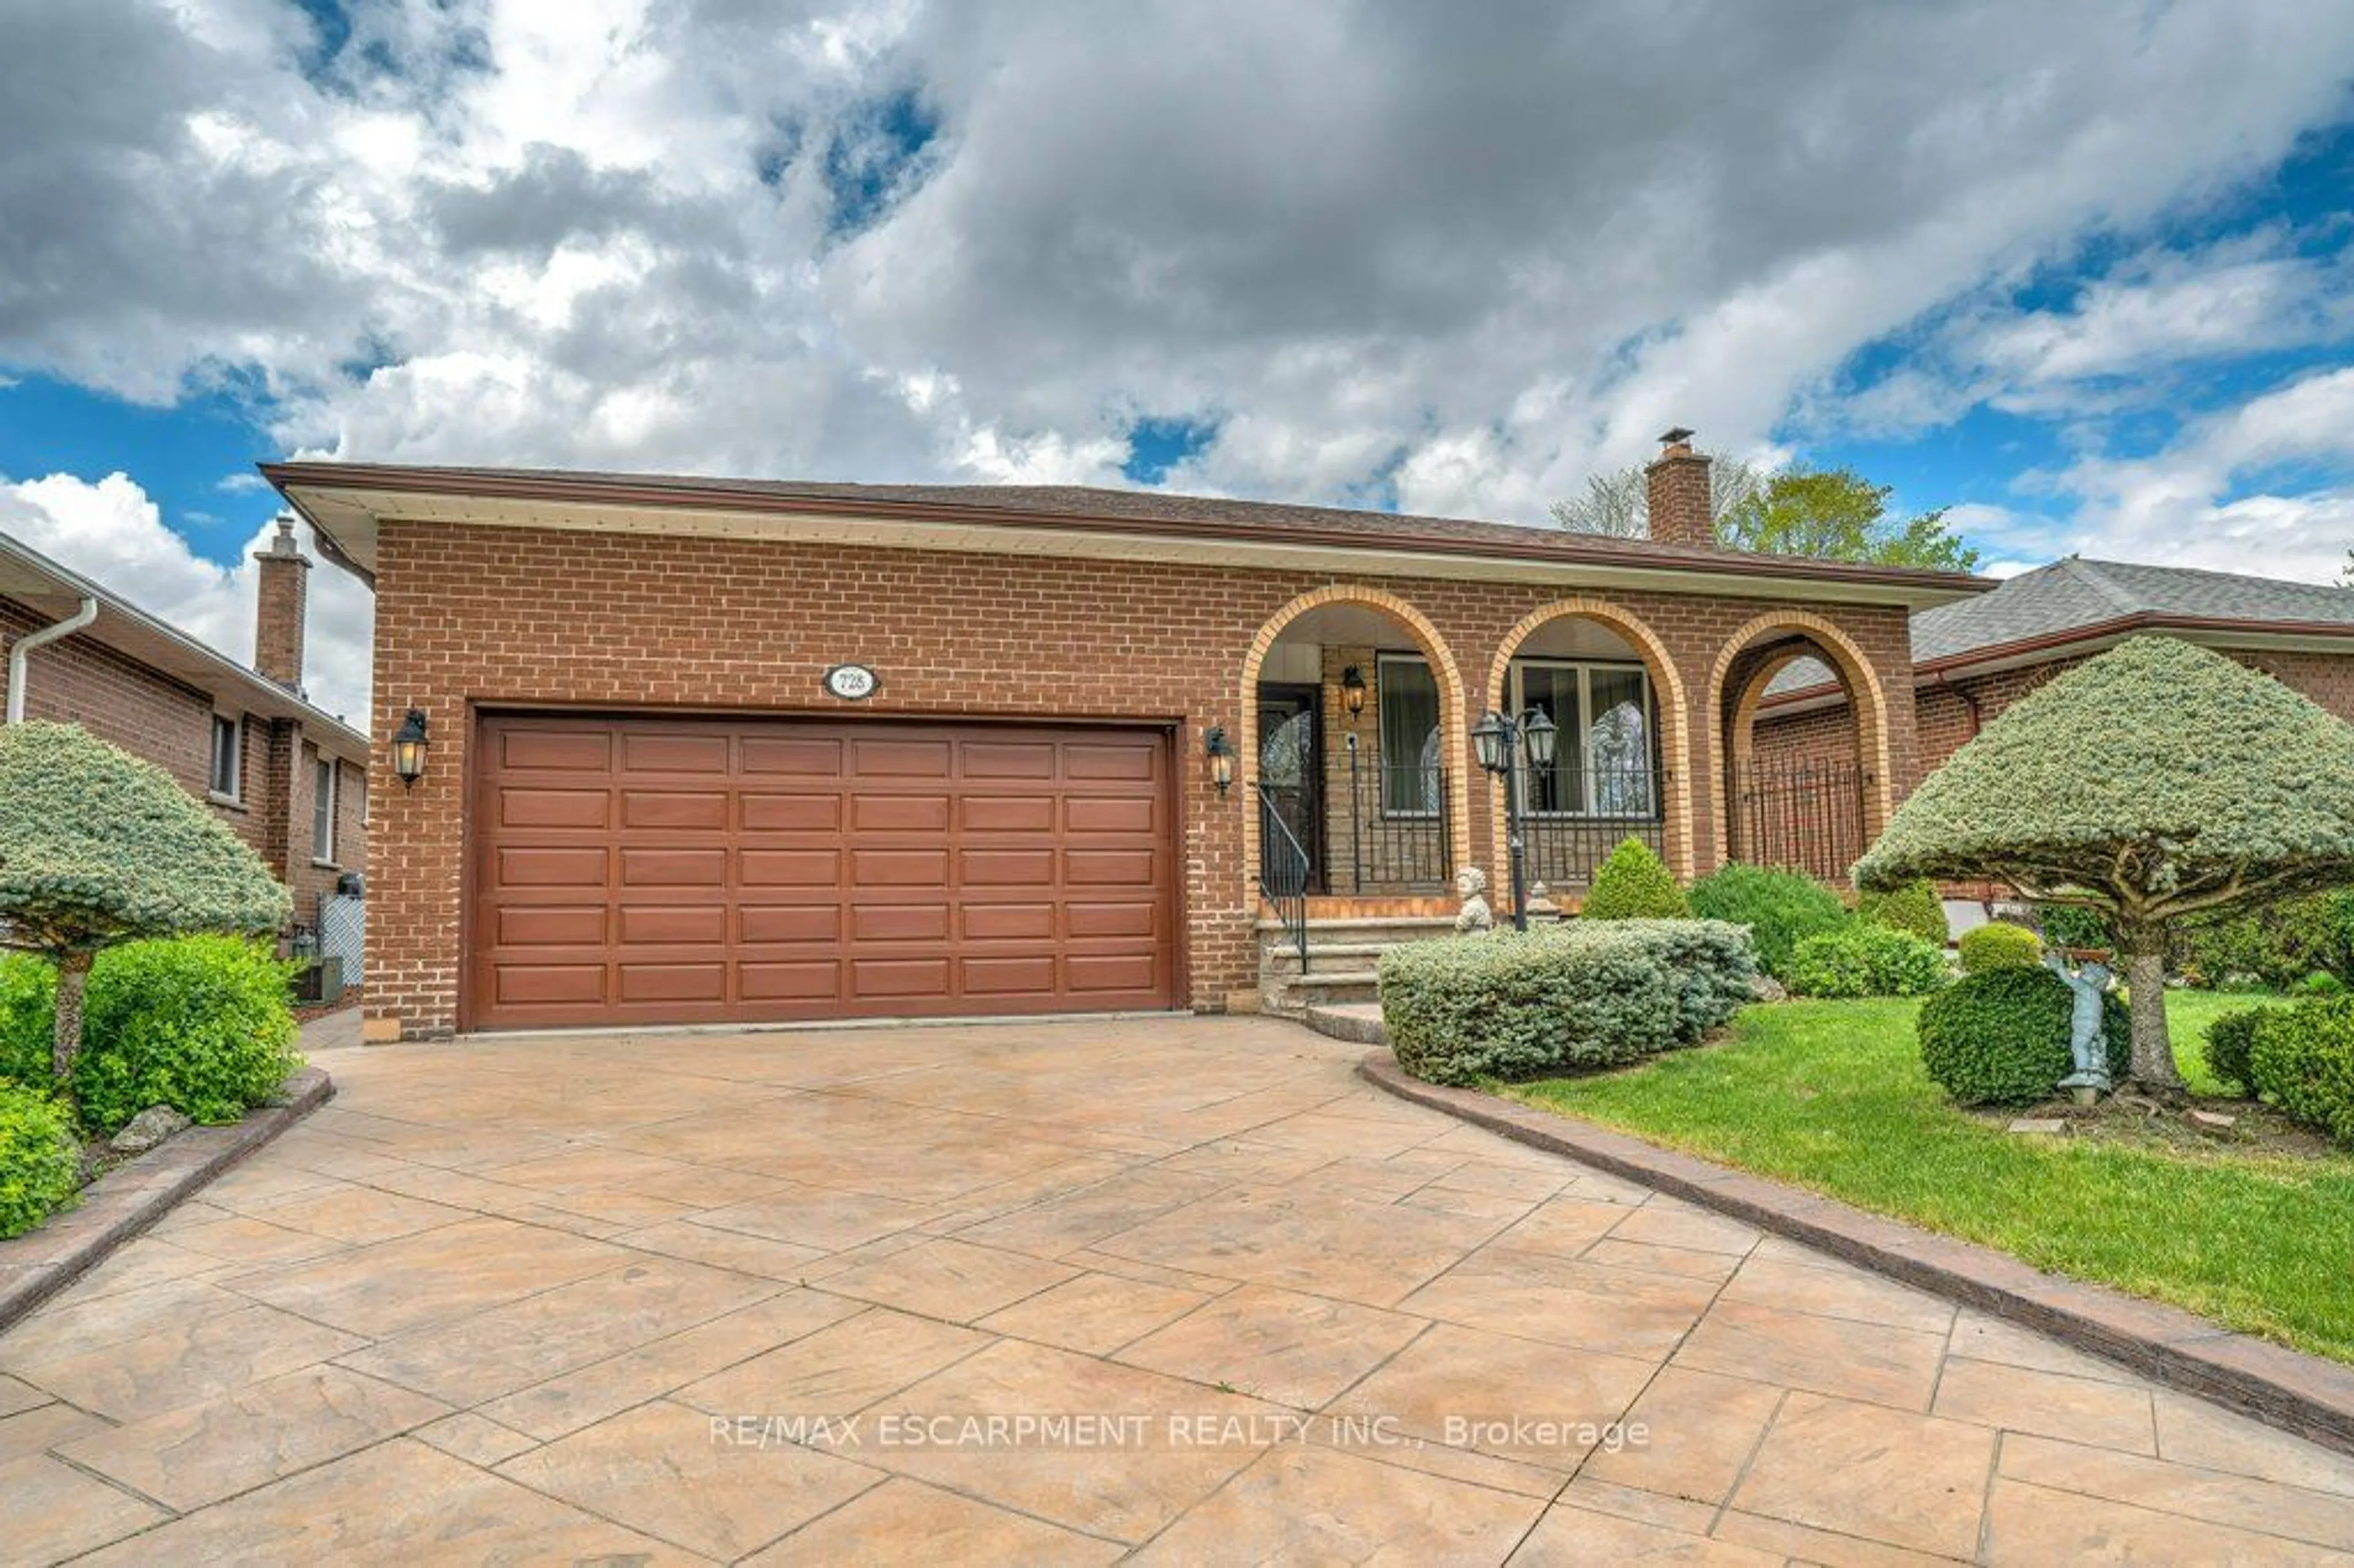 Home with brick exterior material for 728 Eversley Dr, Mississauga Ontario L5A 2C9